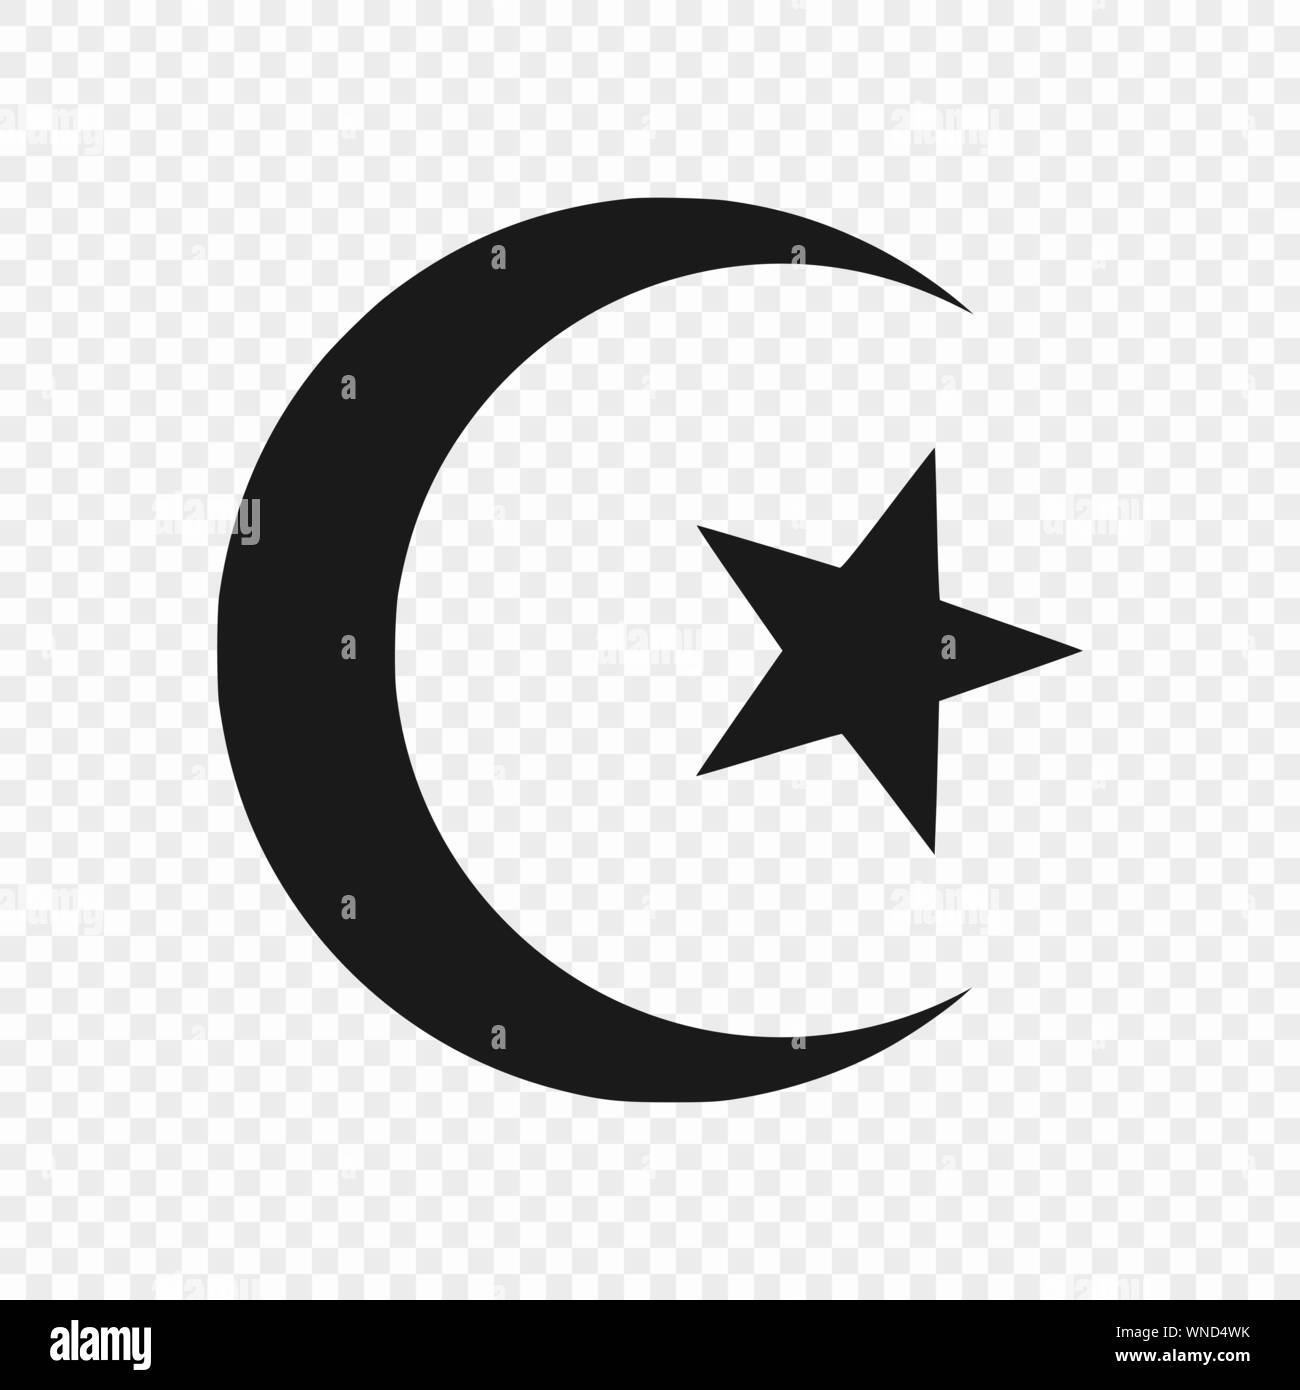 Star and crescent - symbol of Islam. Vector illustration Stock Vector